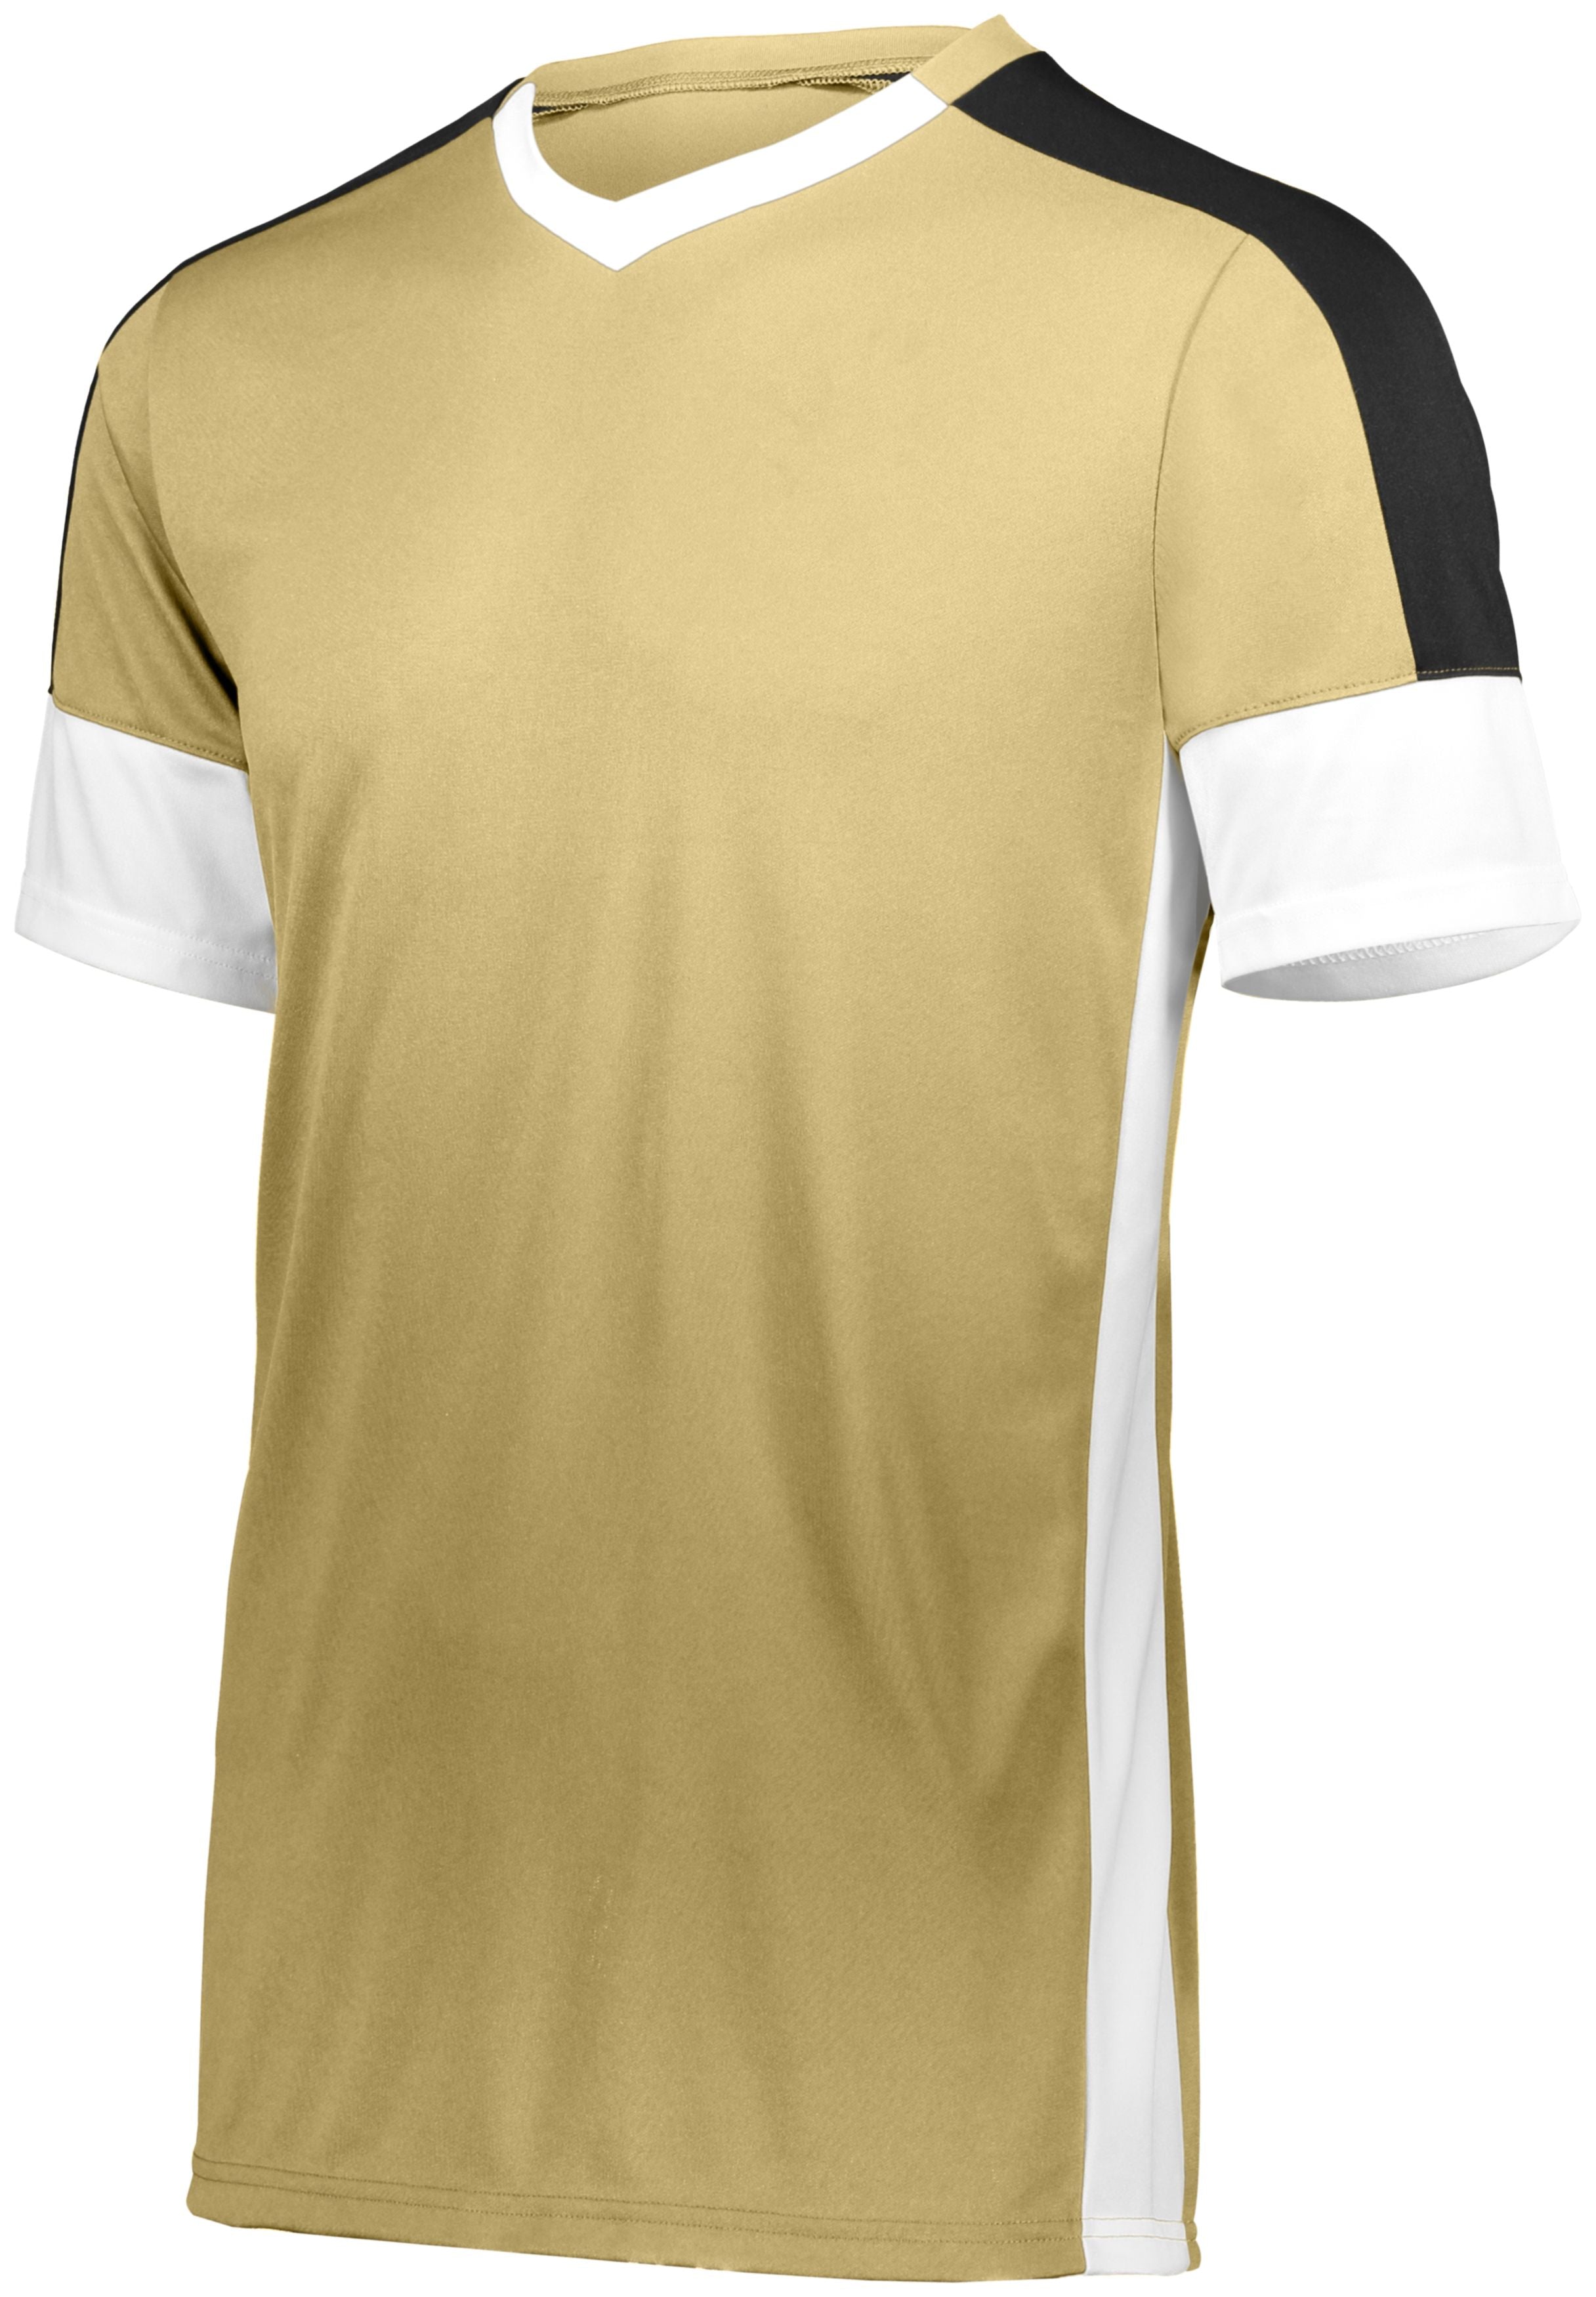 High 5 Youth Wembley Soccer Jersey in Vegas Gold/White/Black  -Part of the Youth, Youth-Jersey, High5-Products, Soccer, Shirts, All-Sports-1 product lines at KanaleyCreations.com